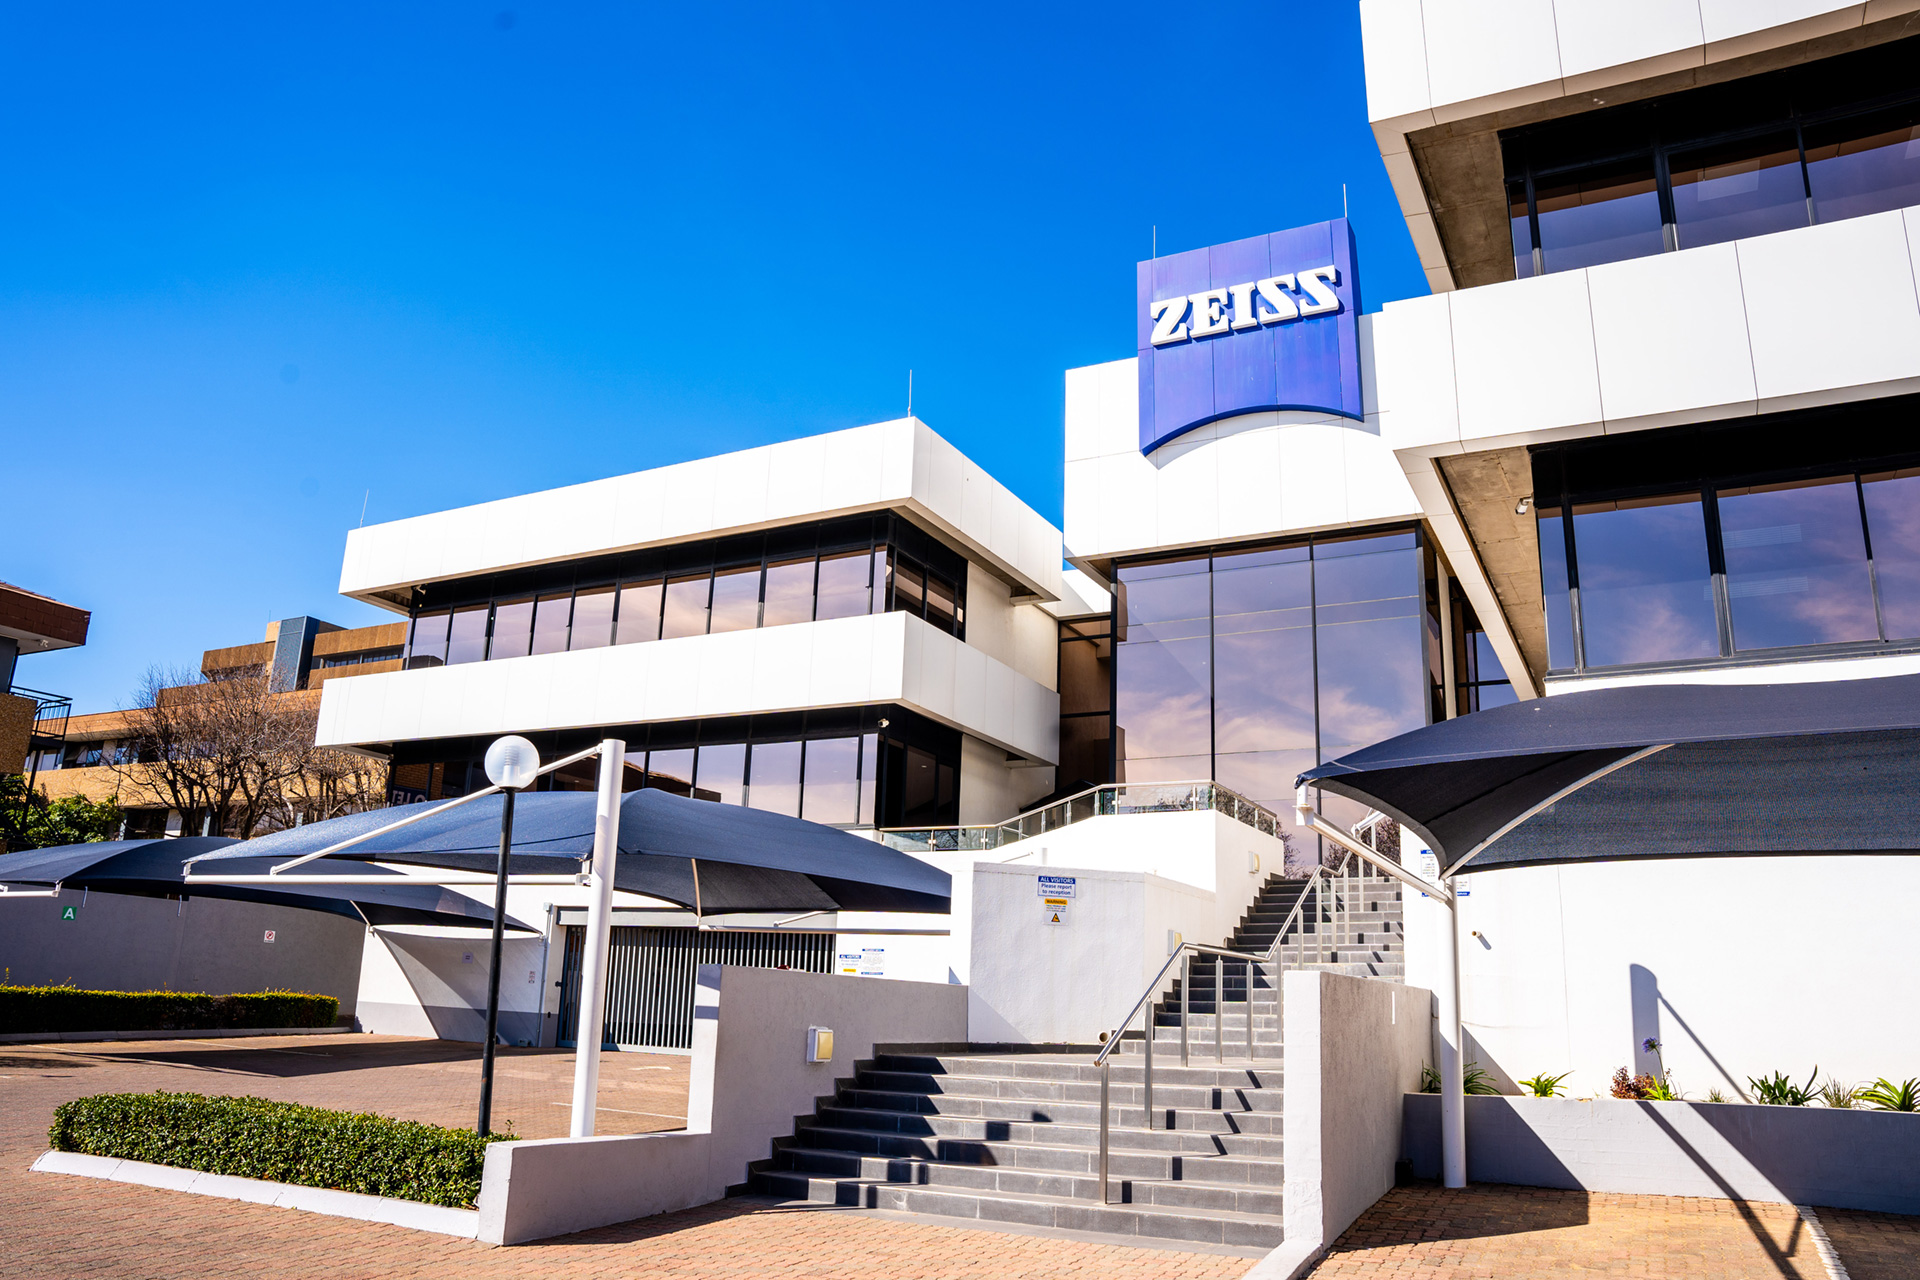 Picture of the ZEISS building in South Africa